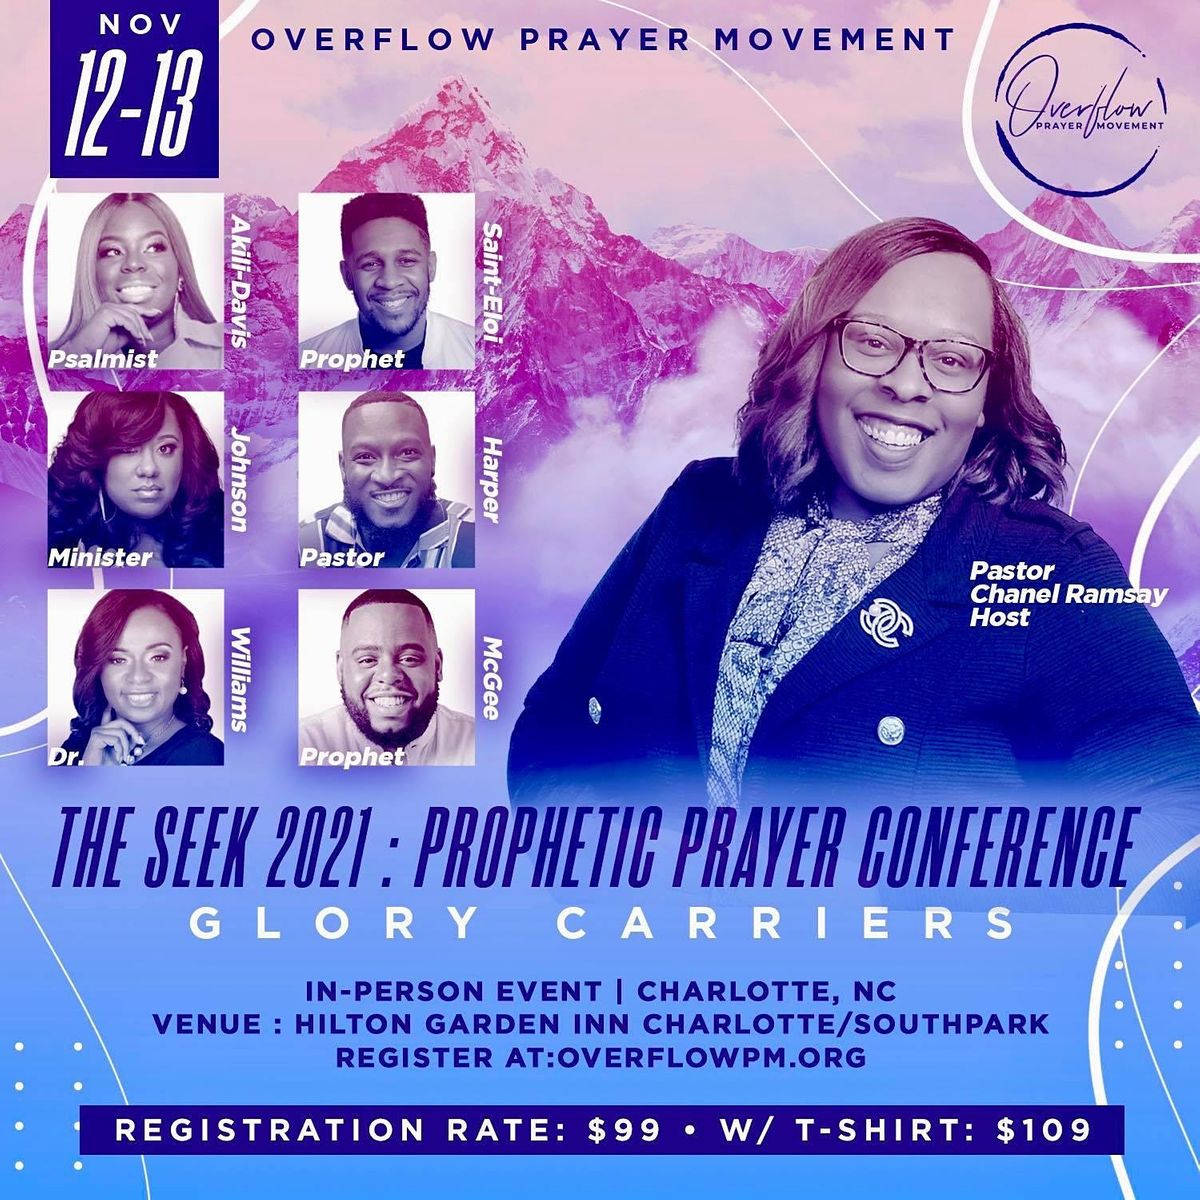 The SEEK 2021 Prophetic Prayer Conference